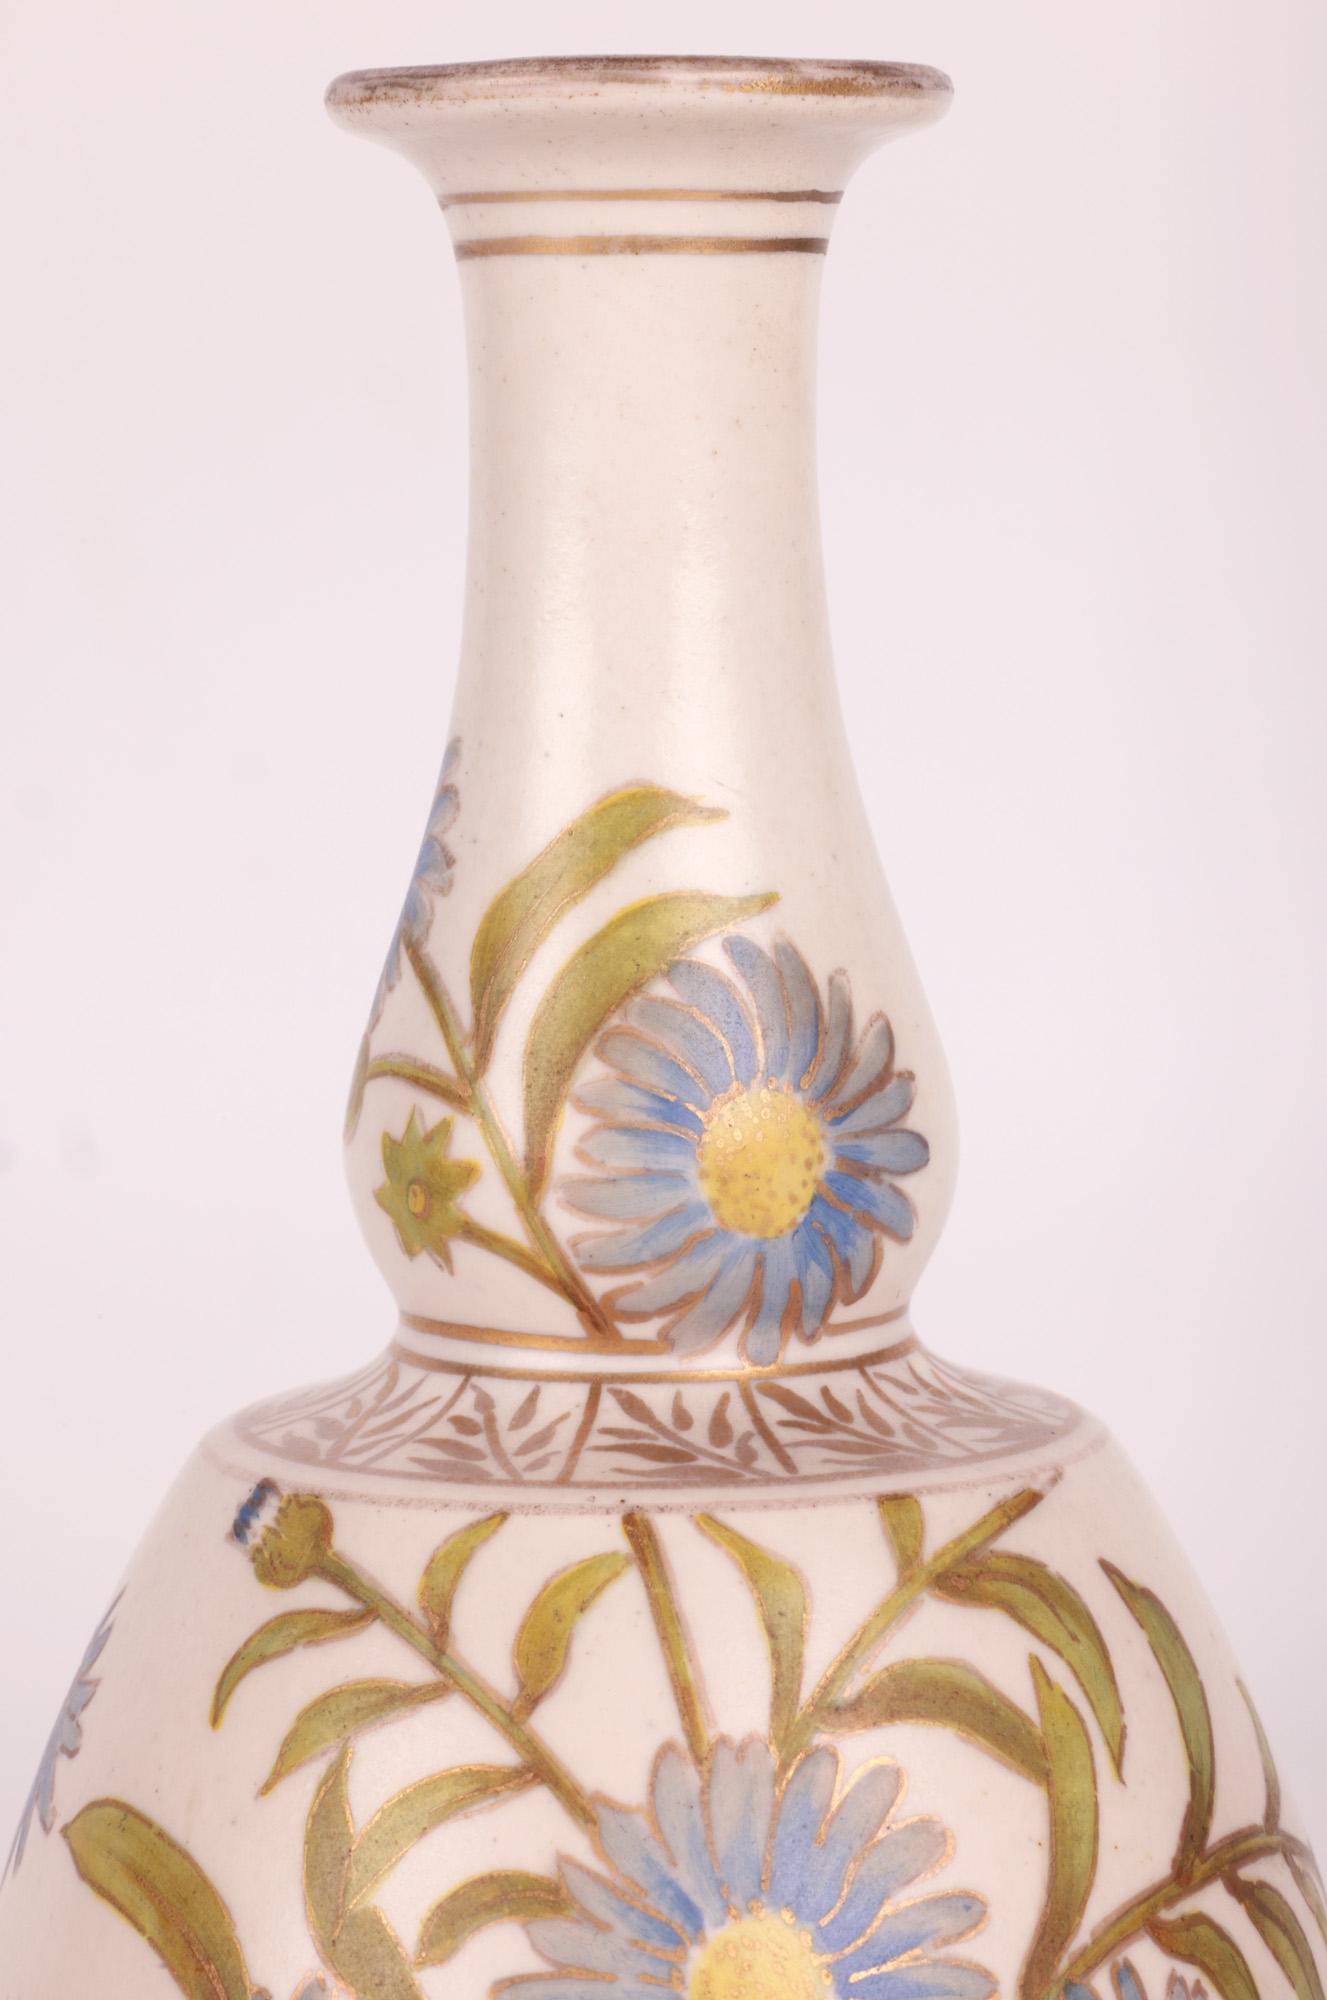 A stylish and impressive Doulton Lambeth Carrara floral painted art pottery vase signed AB and dating between 1887 and 1891. The vase stands on a narrow round foot with slightly recessed base with a round bulbous lower shouldered body with a narrow